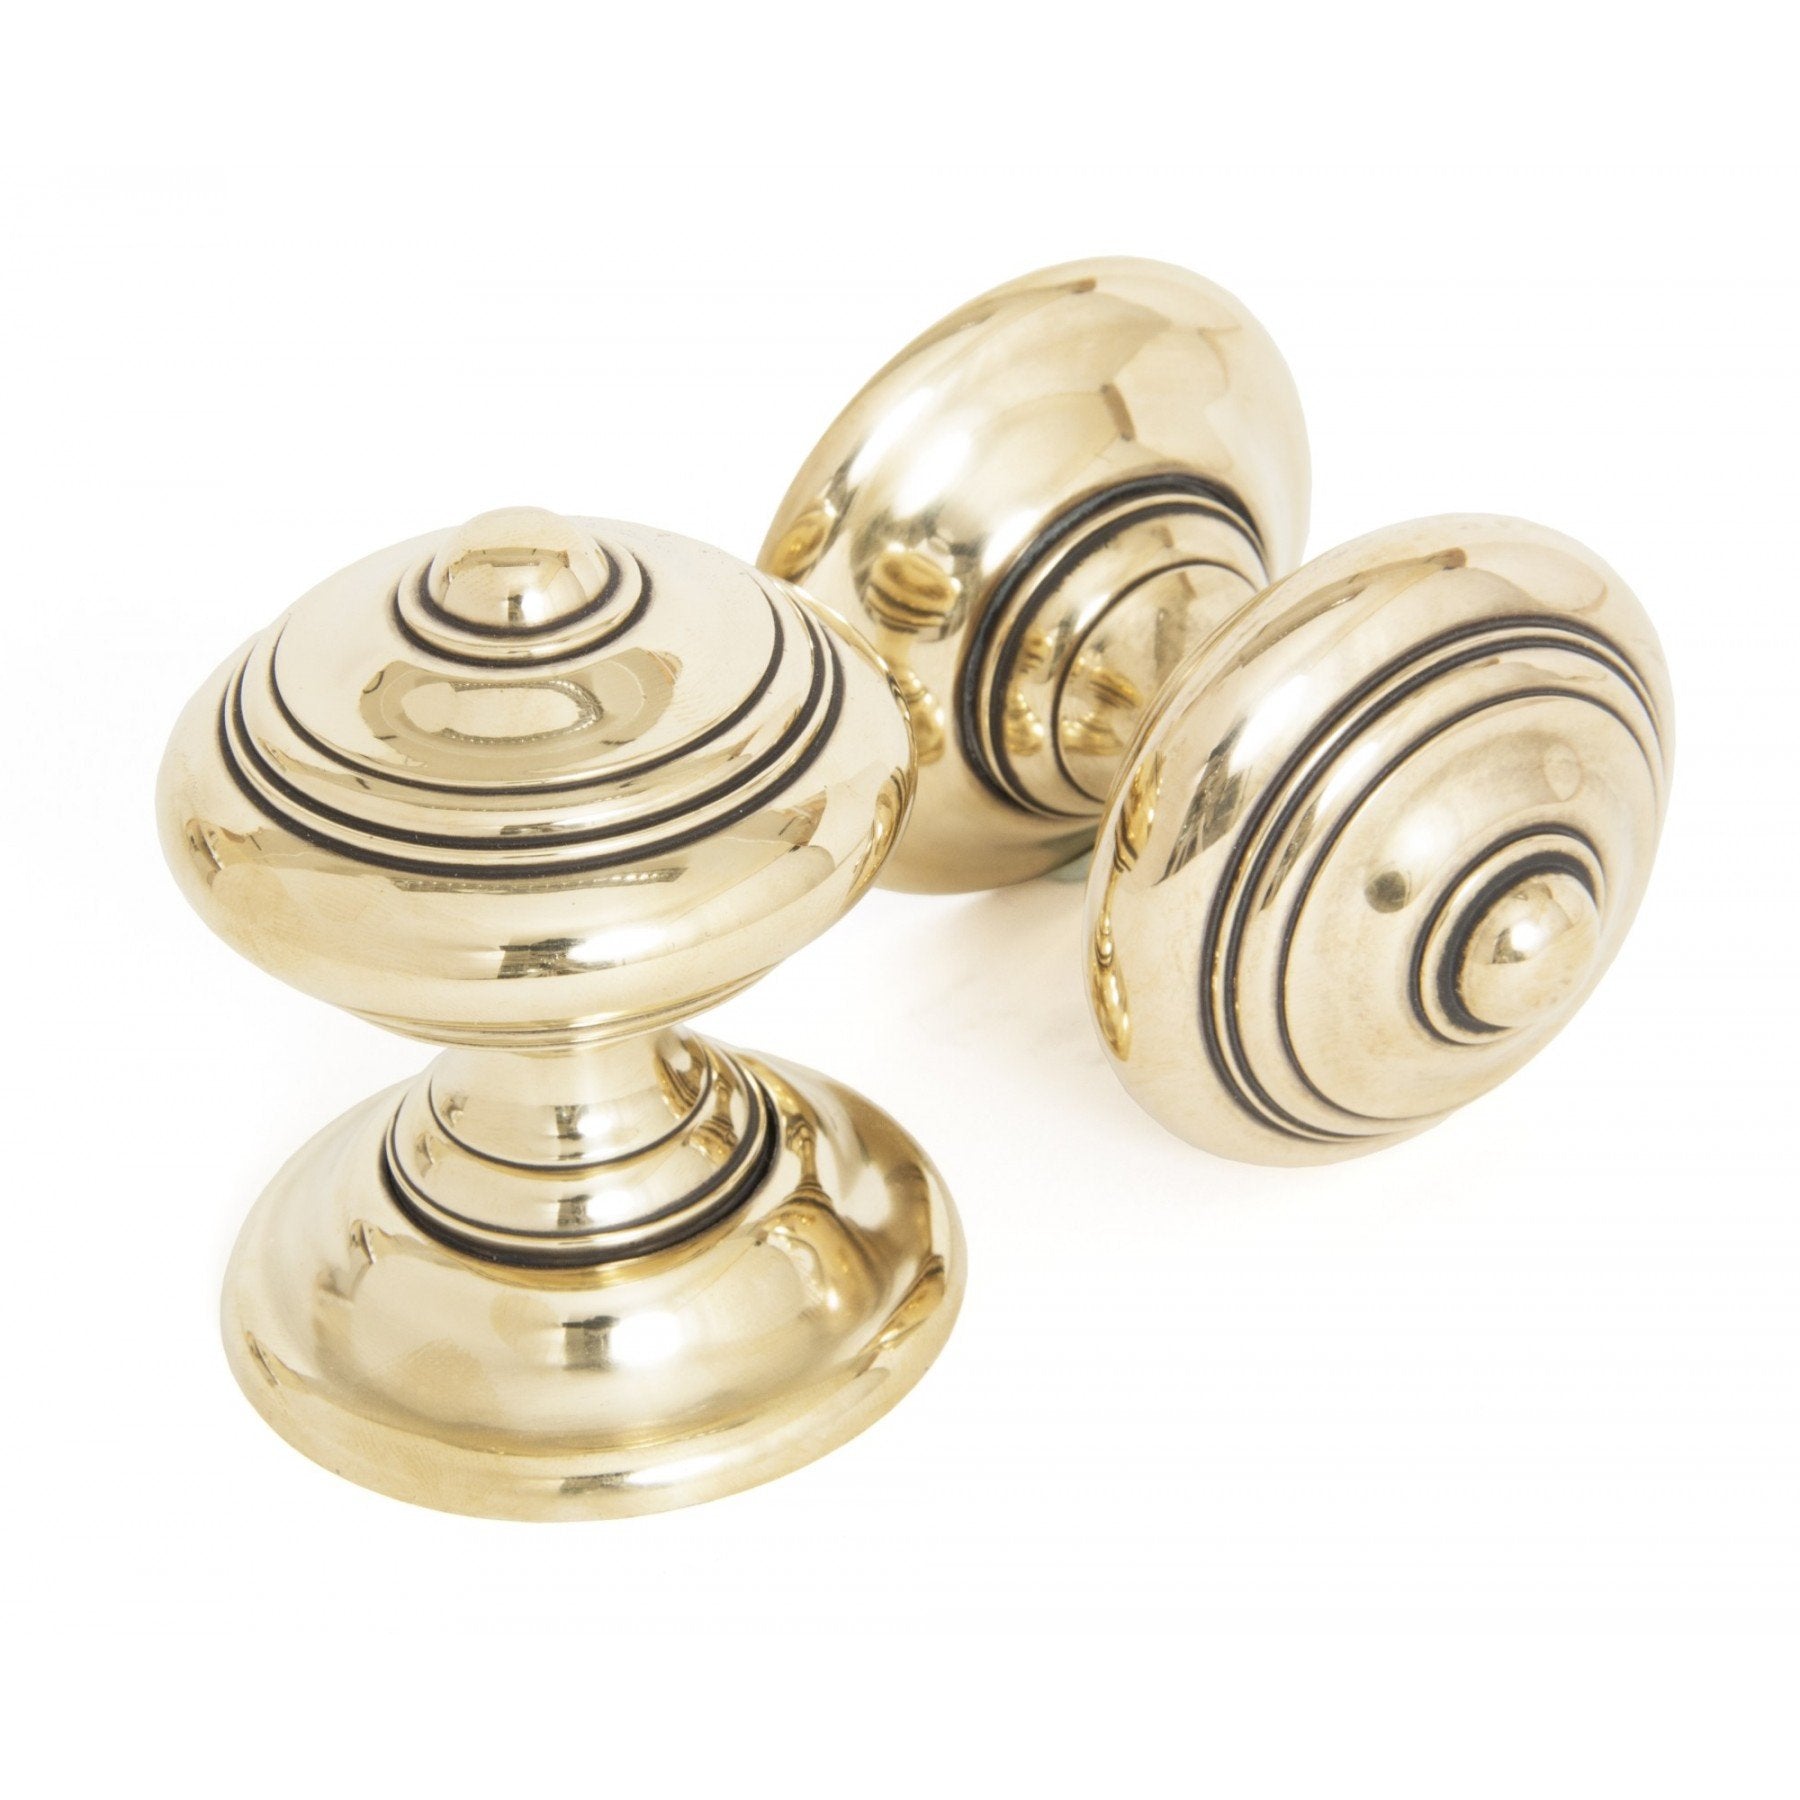 From the Anvil Aged Brass Elmore Concealed Mortice Knob Set